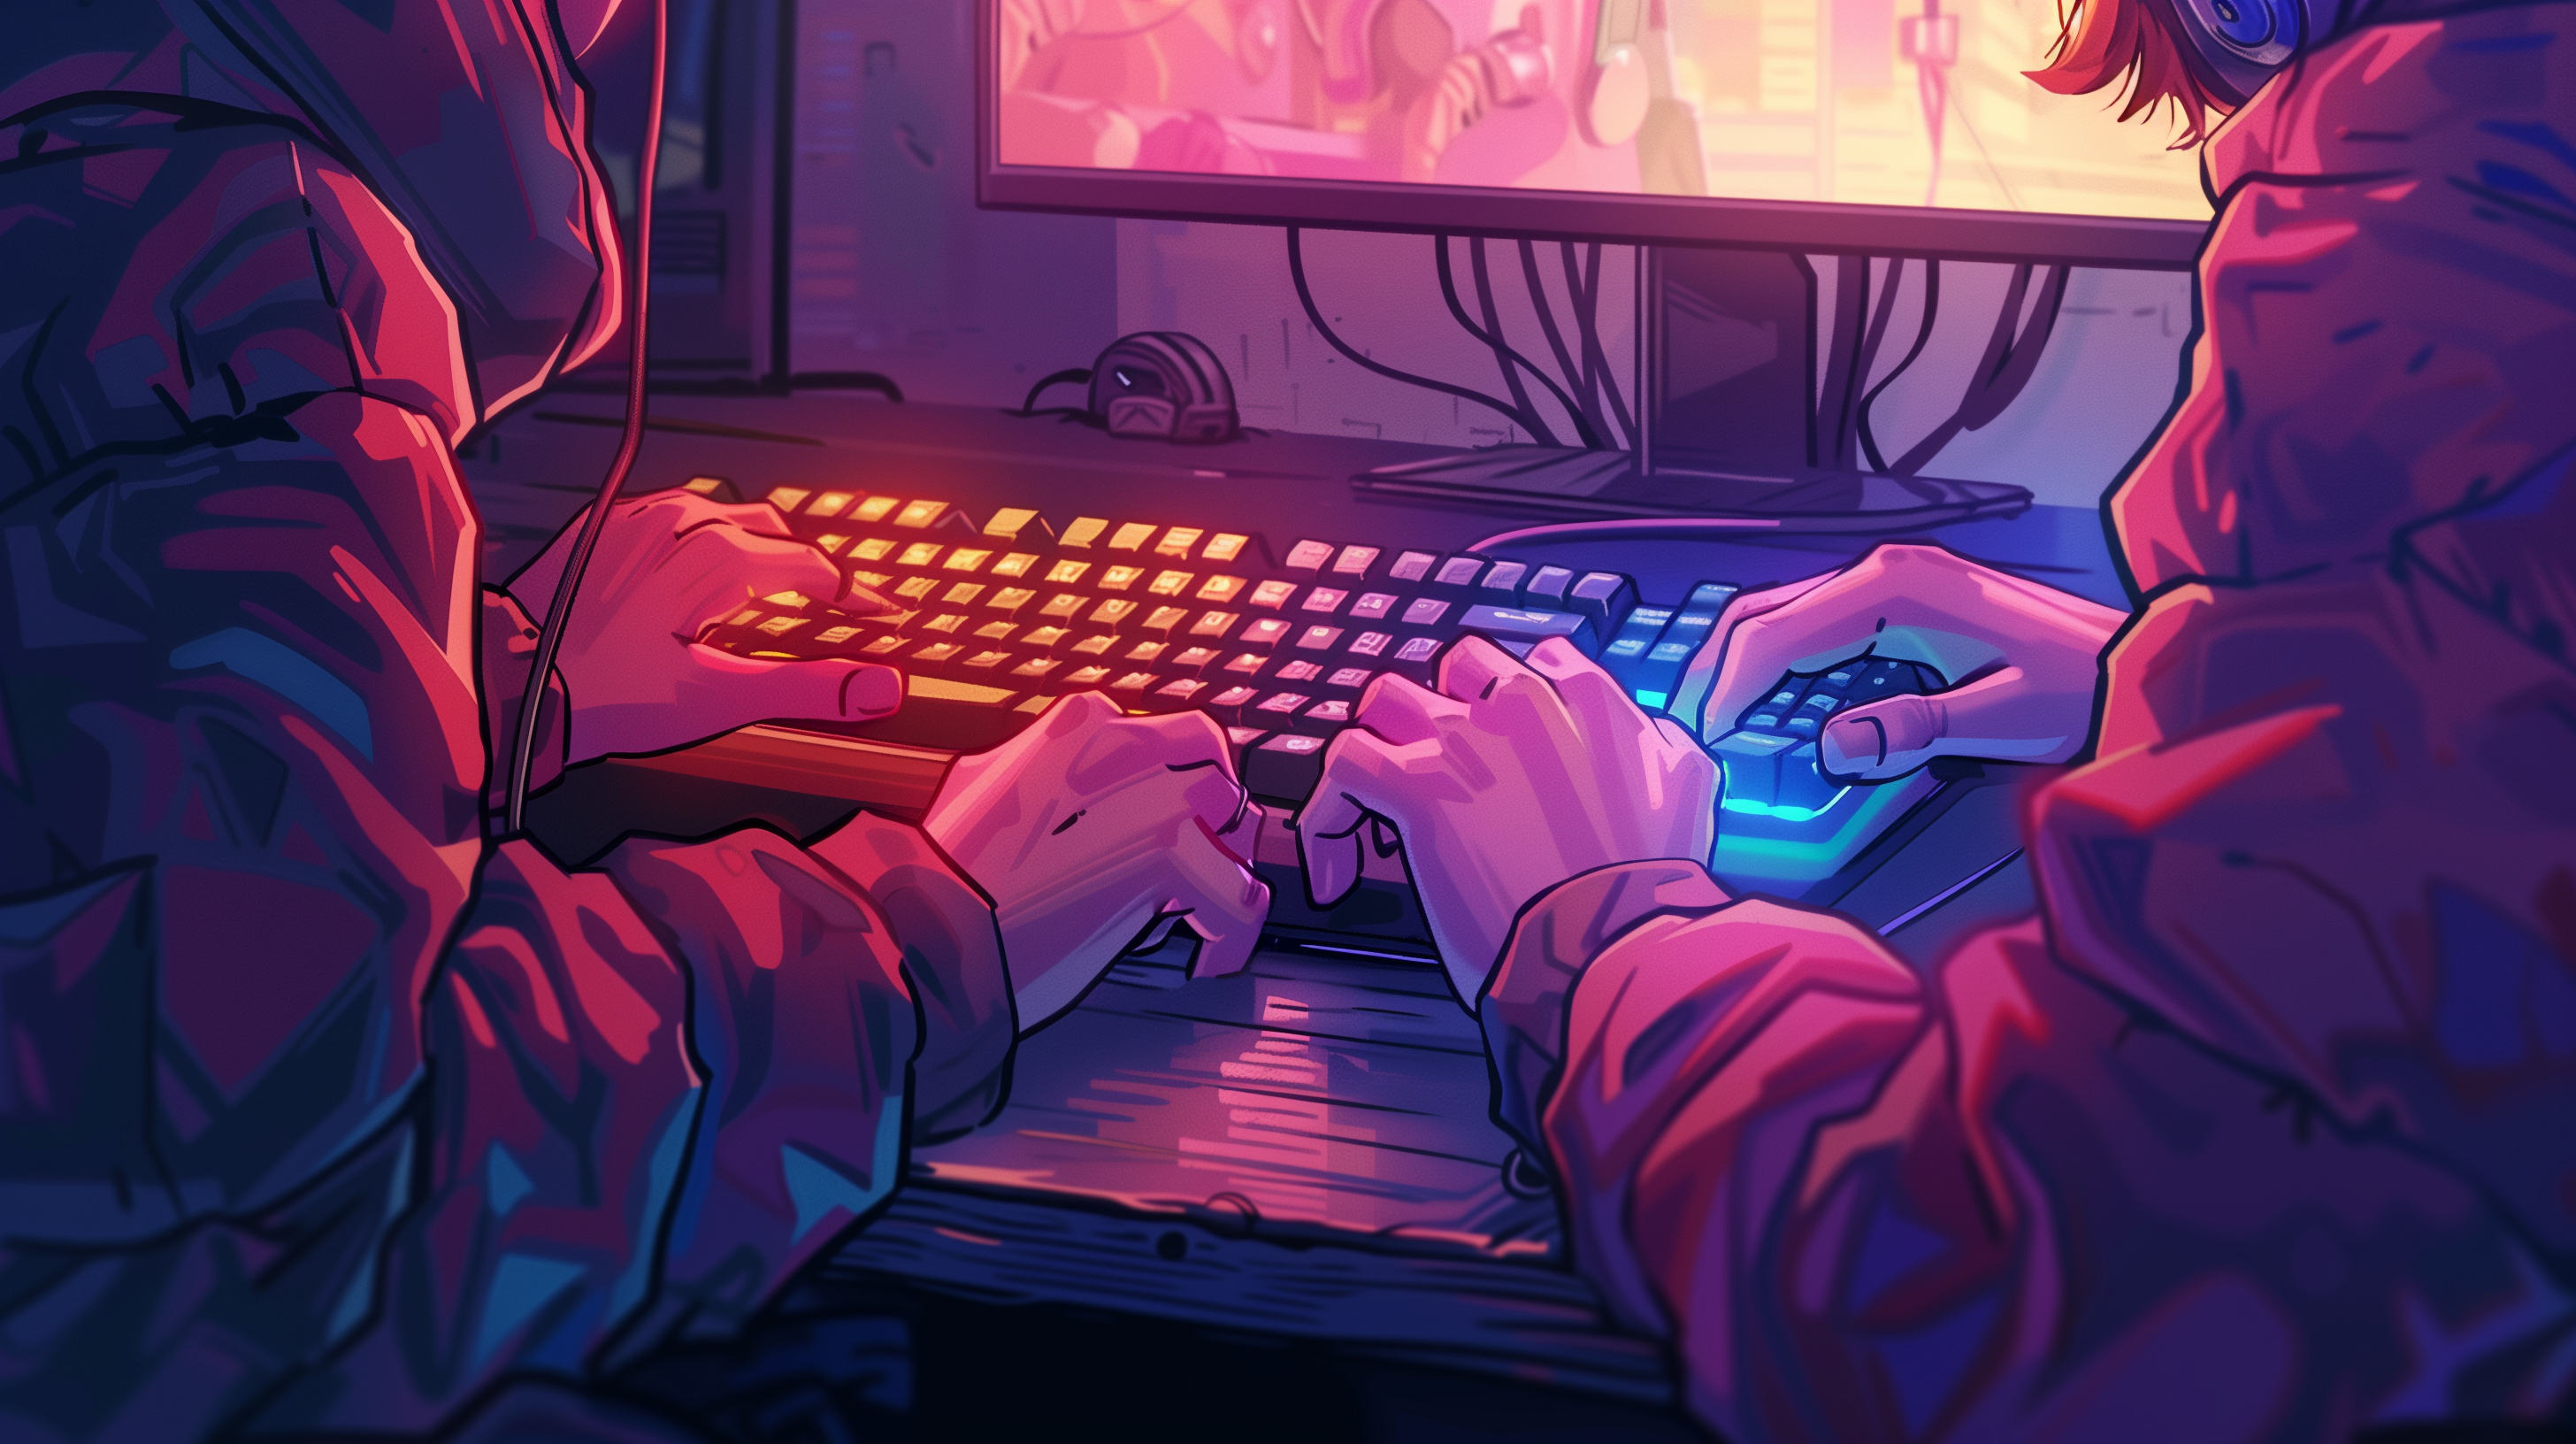 illustration of two people awkwardly trying to share a single keyboard and mouse setup for gaming.